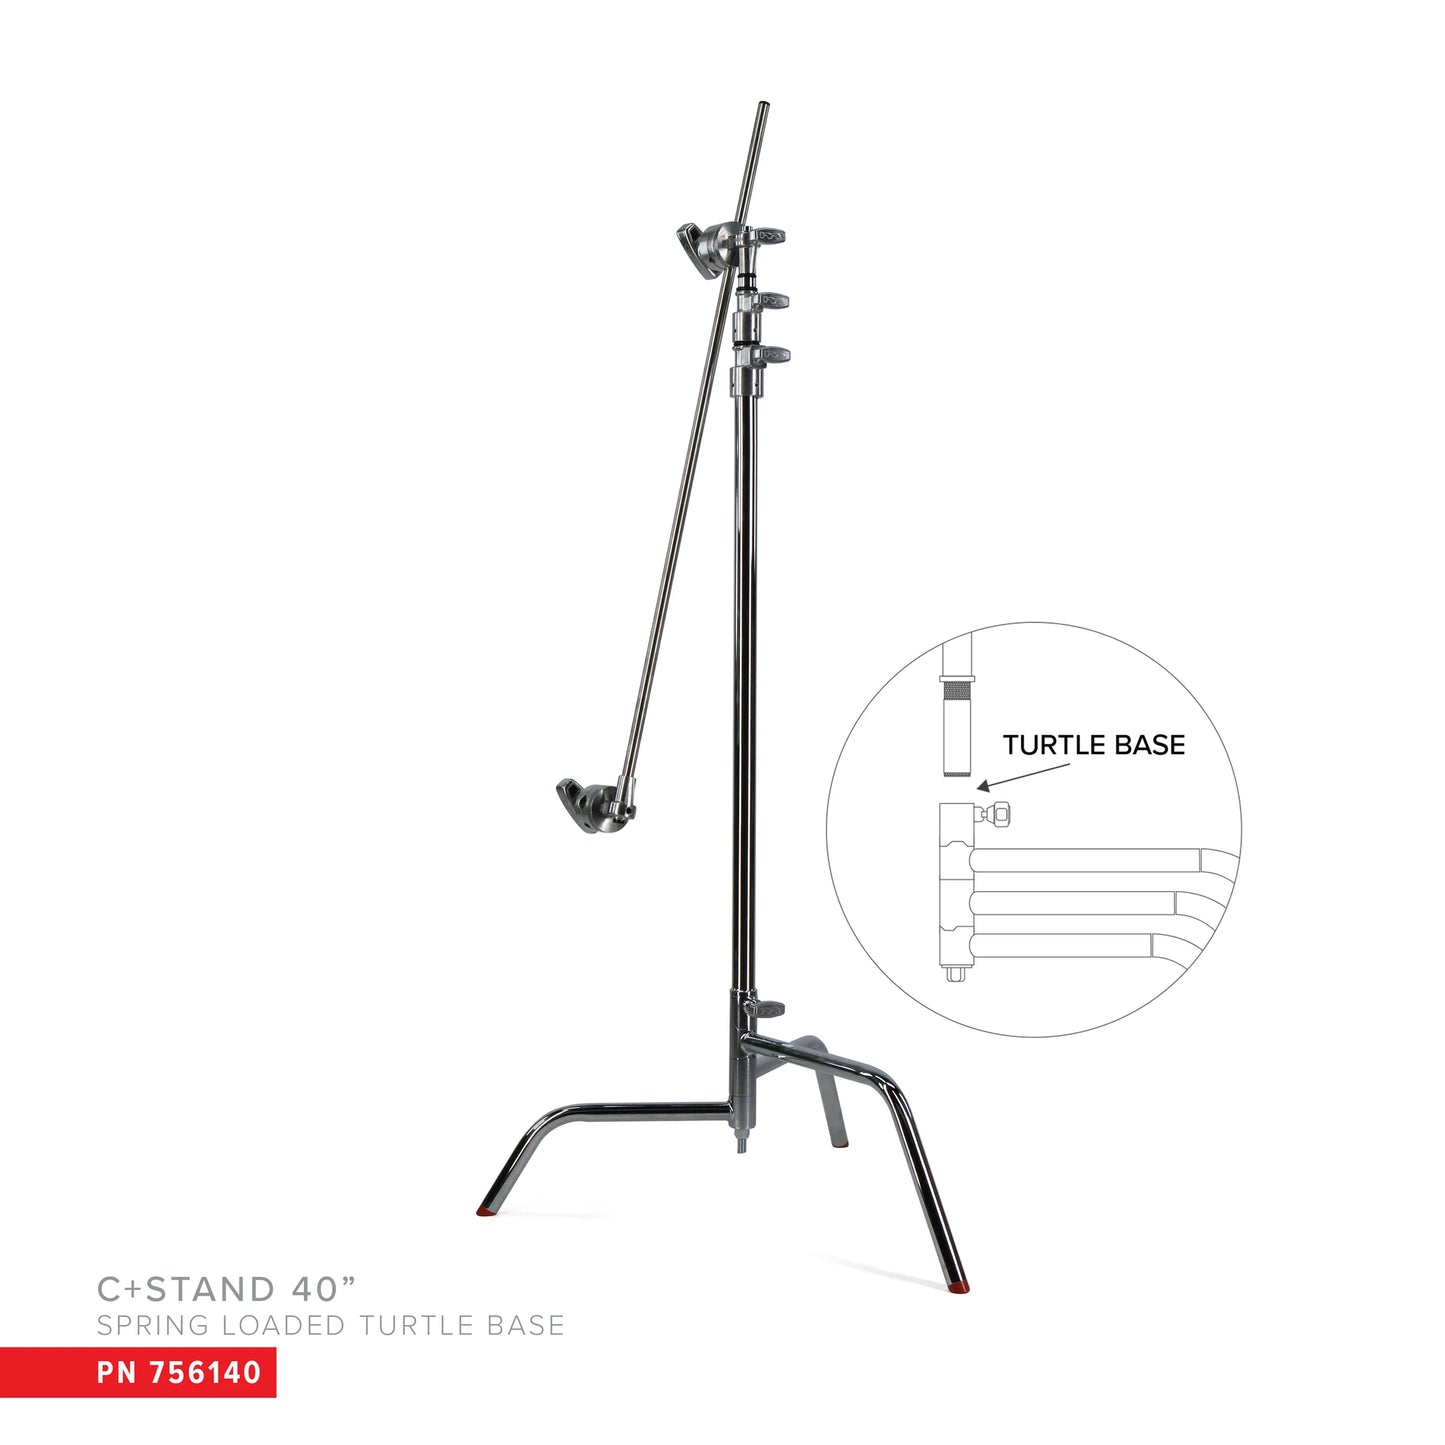 Matthews 40" C-Stand with Spring Loaded Turtle Base + Grip Arm and Head